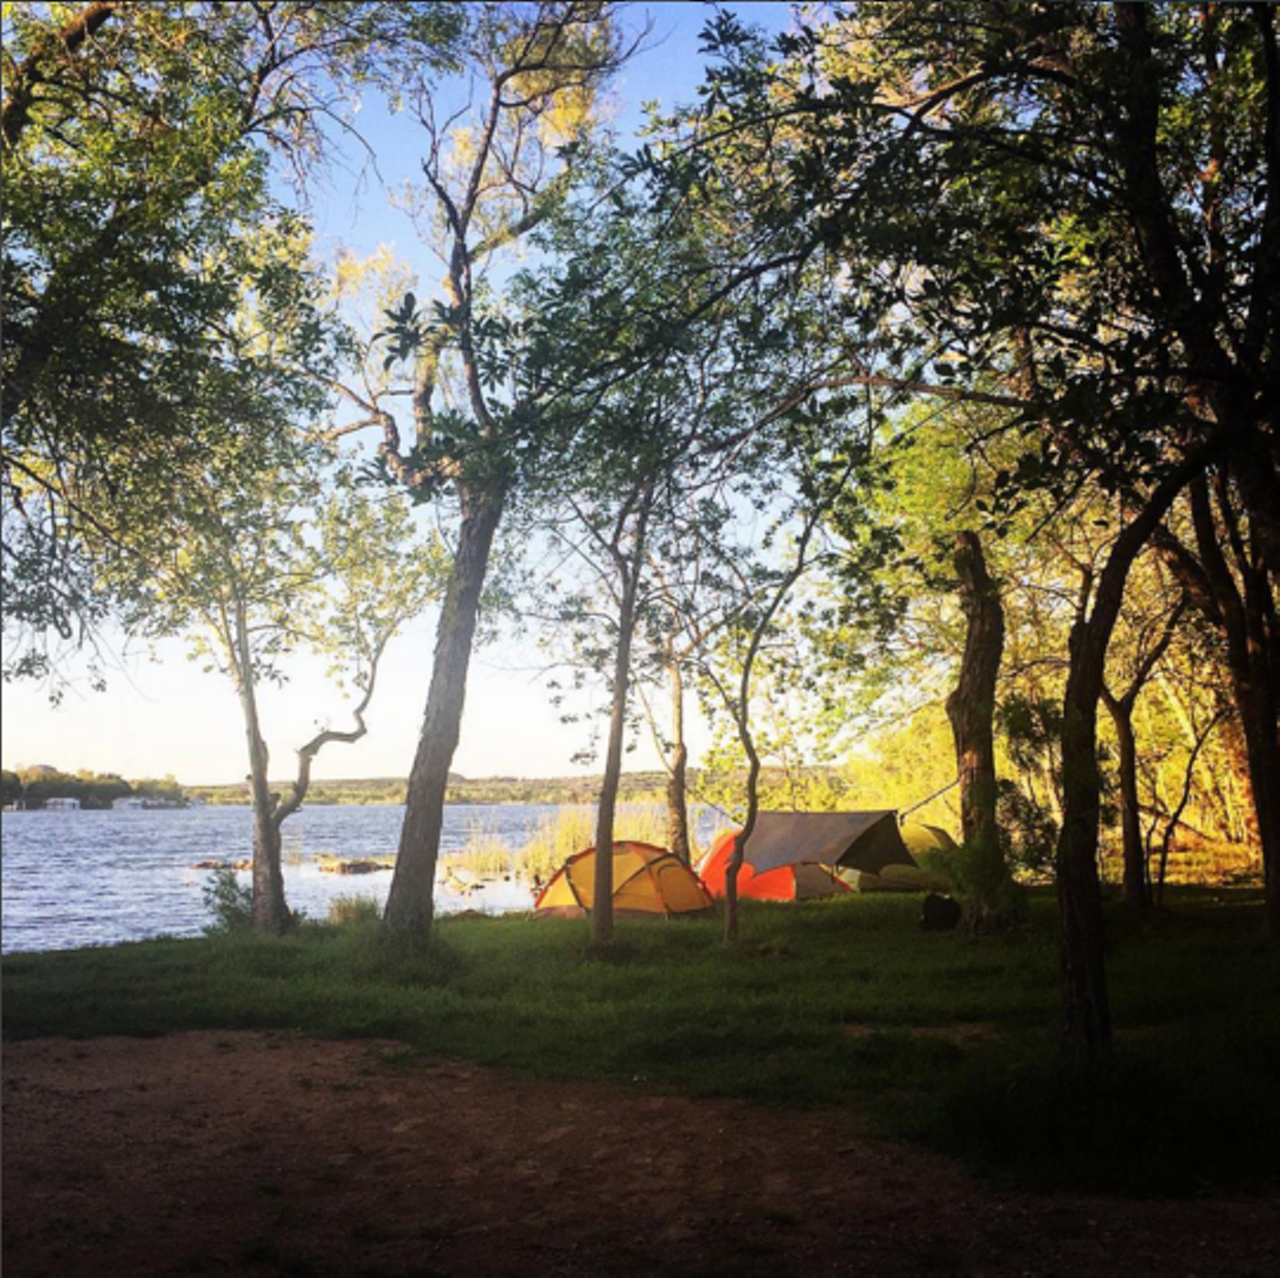  
Inks Lake State Park
3630 Park Rd 4 W, Burnet, TX 78611
Distance from San Antonio: 106 miles, 2 hours
Things to do: Swim, boat, water ski, scuba dive and fish. Rent paddle boats, canoes, kayaks or hike the 3.3-mile trails. 
Photo via Instagram/burns24ricky